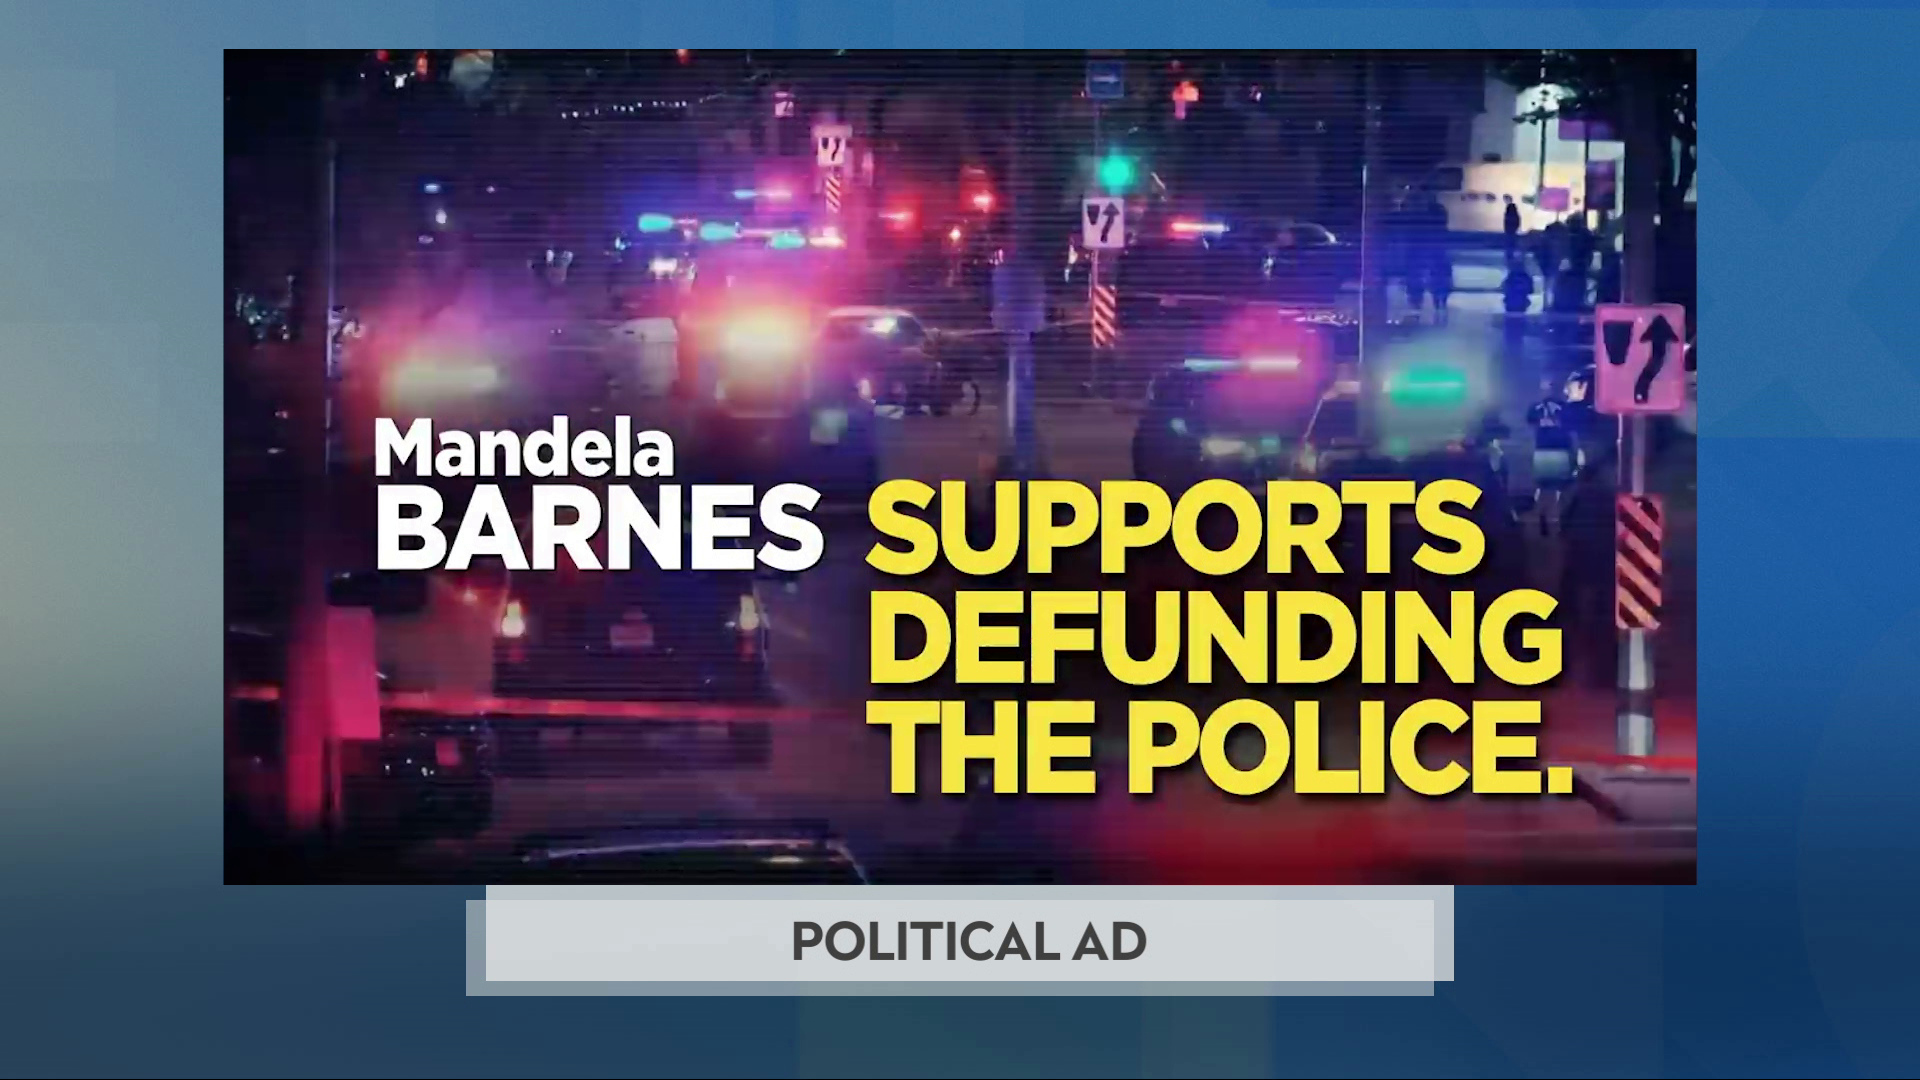 A still image from a political advertisement shows a nighttime scene of numerous police vehicles in an area surrounded by crime scene tape with the words "Mandela Barnes Supports Defunding The Police."